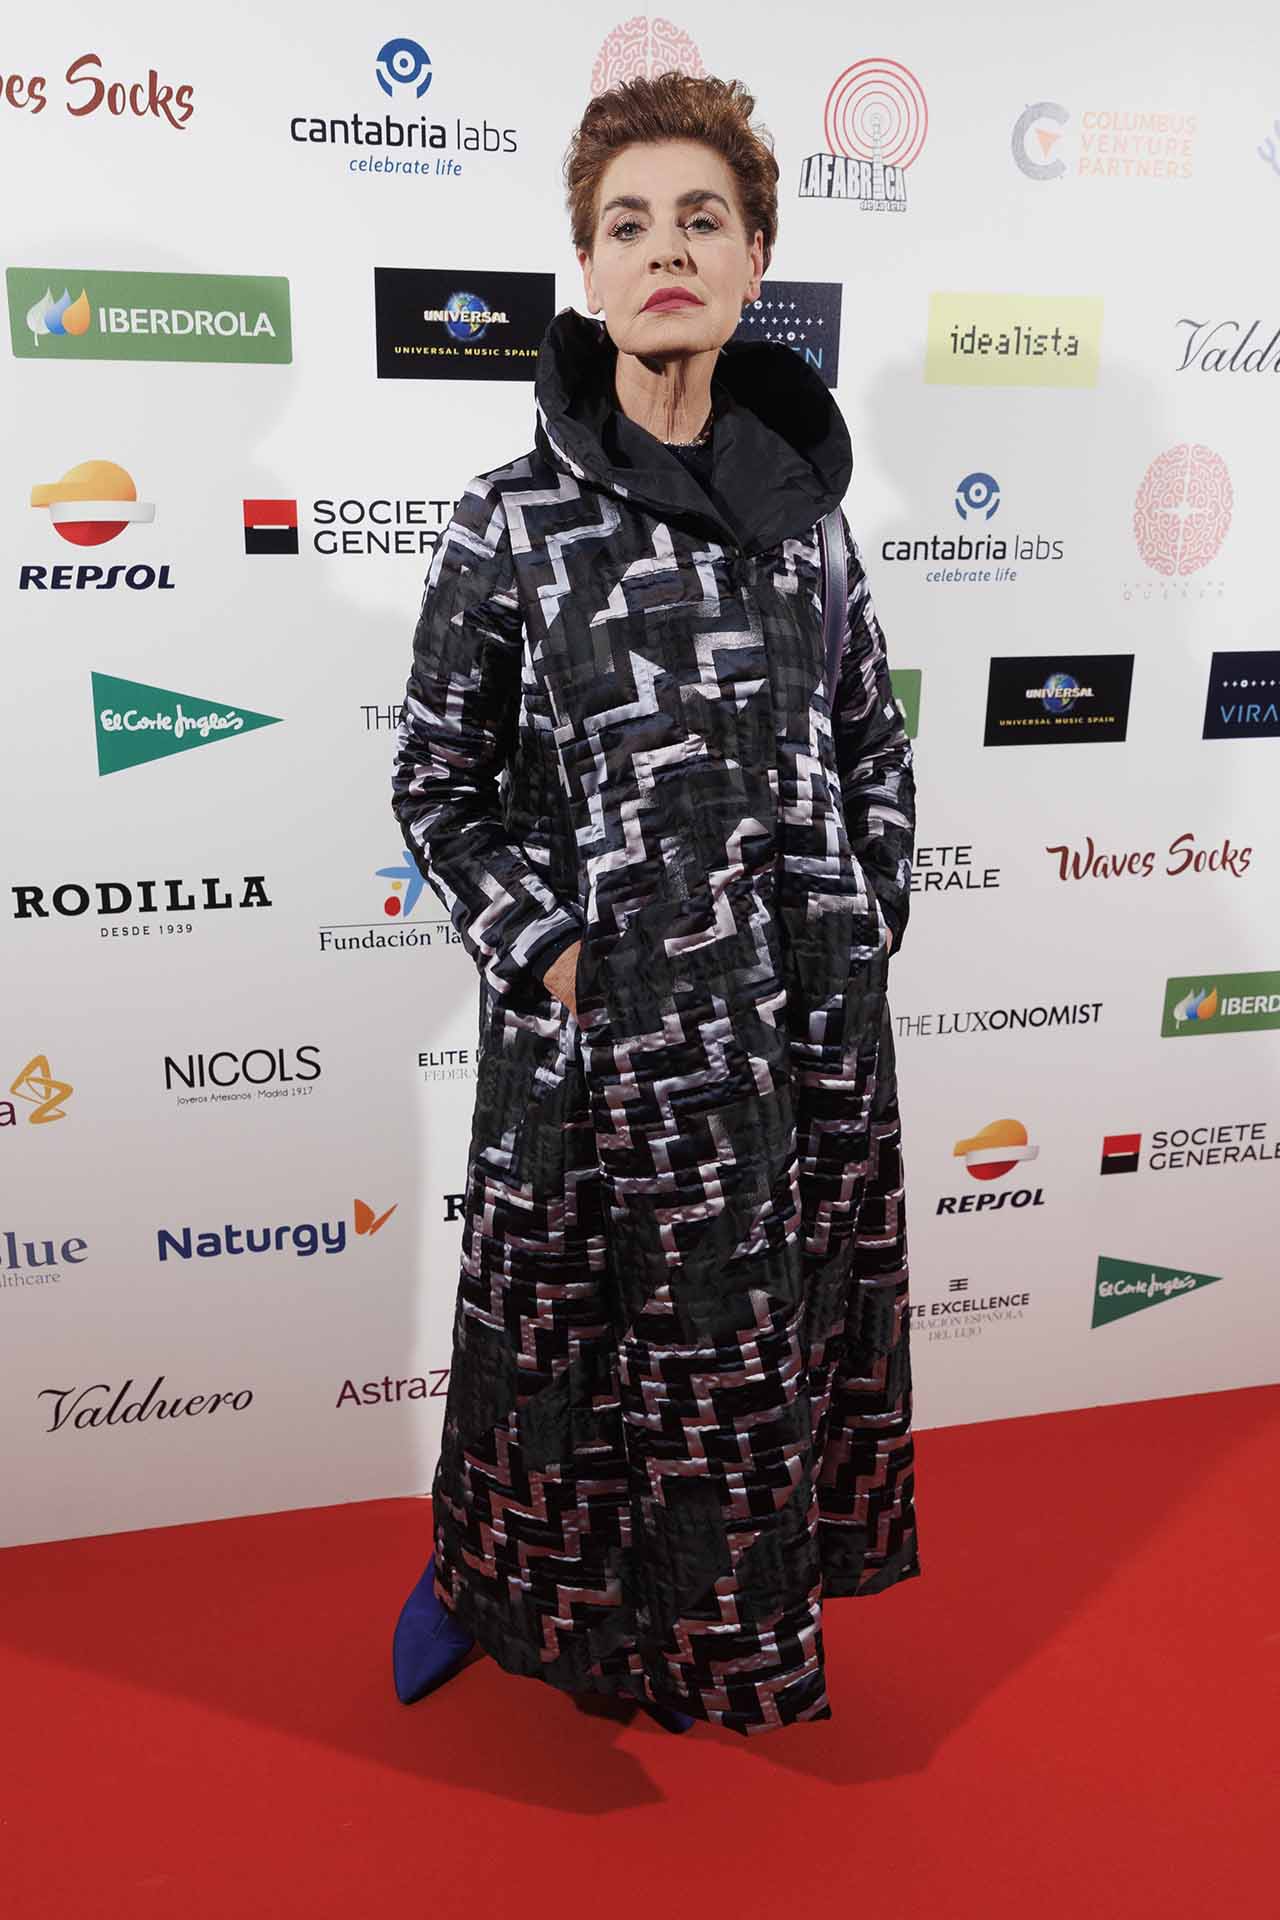 Former model Antonia DellAtte at the photocall of the FundaciÃƒÂ³n Querer and Columbus event in Madrid on Tuesday, April 26, 2022.